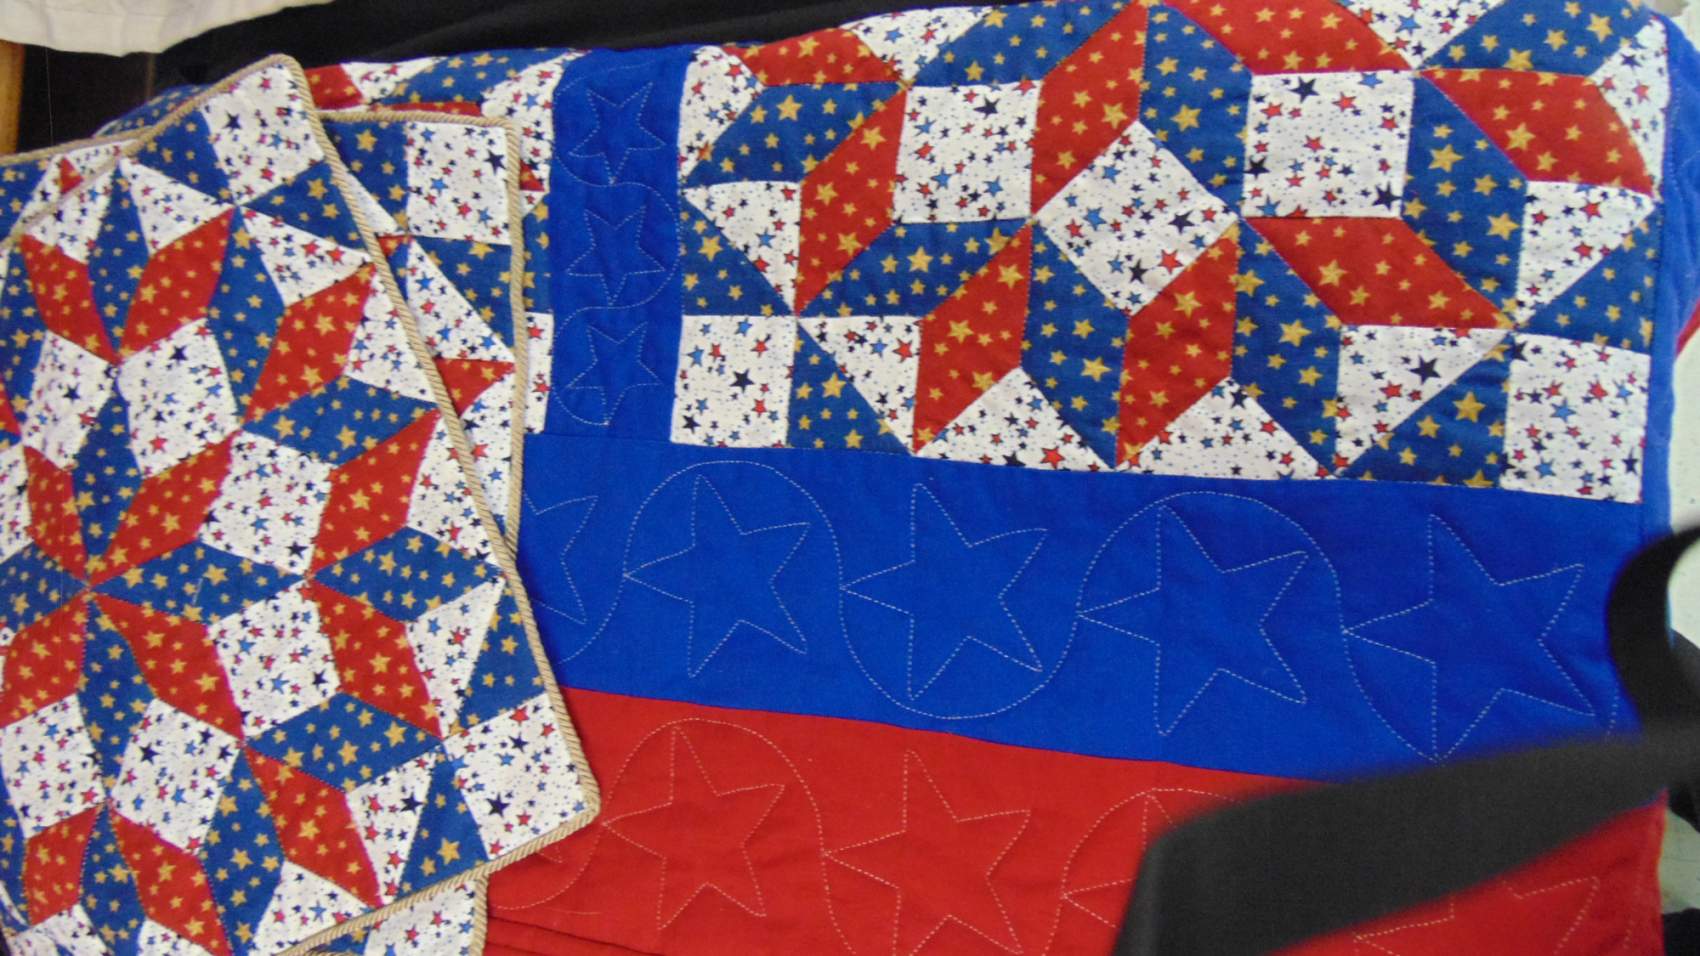 "Red, White and Blue," quilt by Ruby McBee won People's Choice at the Art is Ageless 2017 competition.